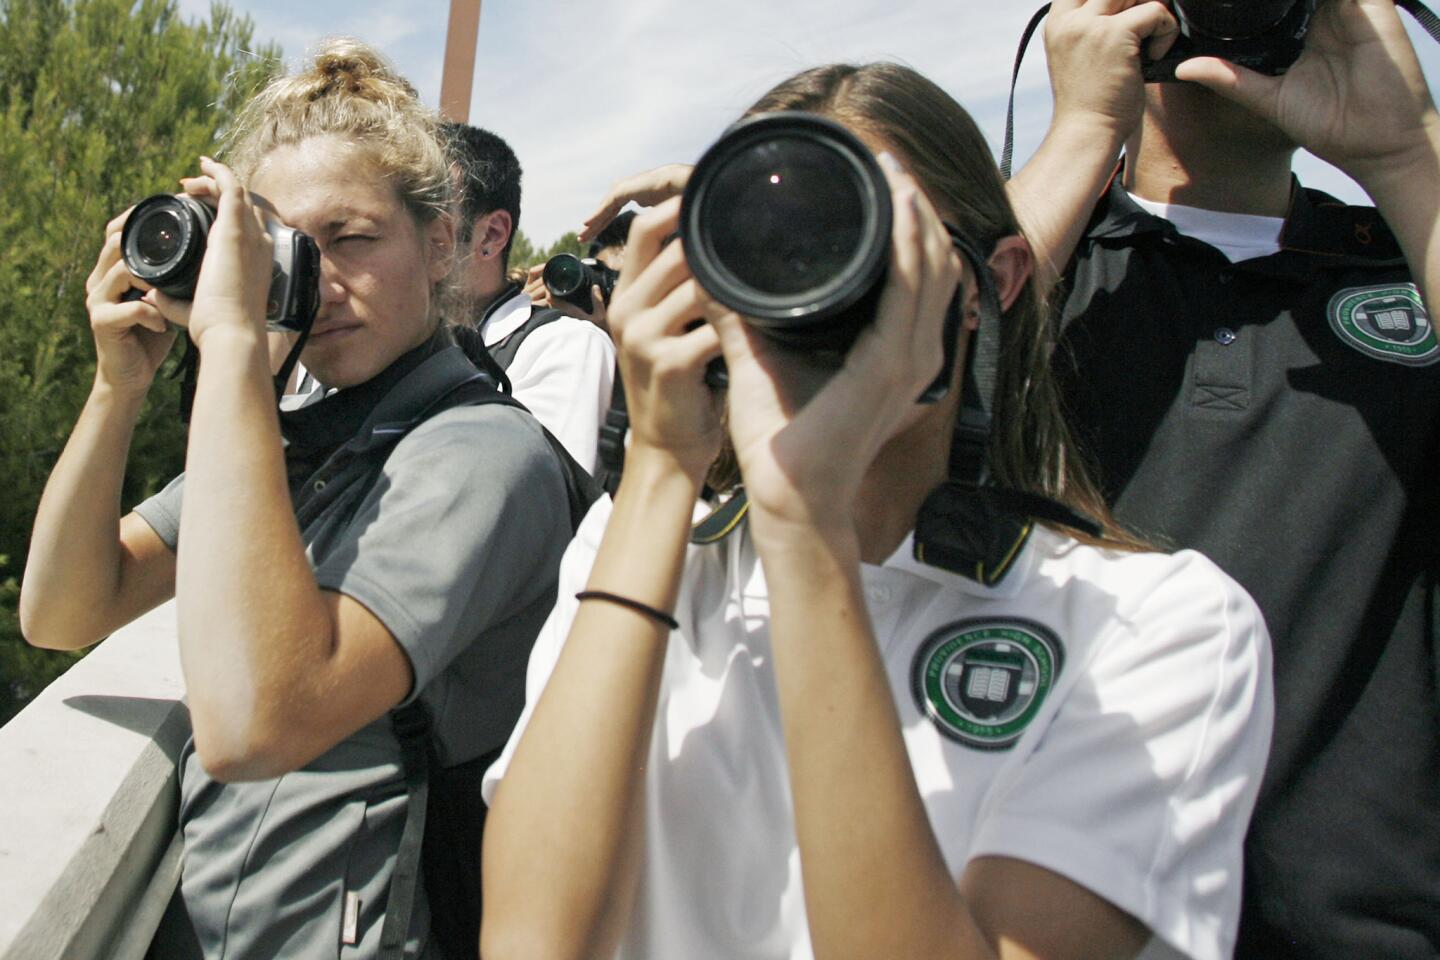 Photography students Marylin Petrov, 17, left, and Taylor Goffin, 14, take pictures of Endeavour as it flies near Providence High School in Burbank on Friday, September 21, 2012.